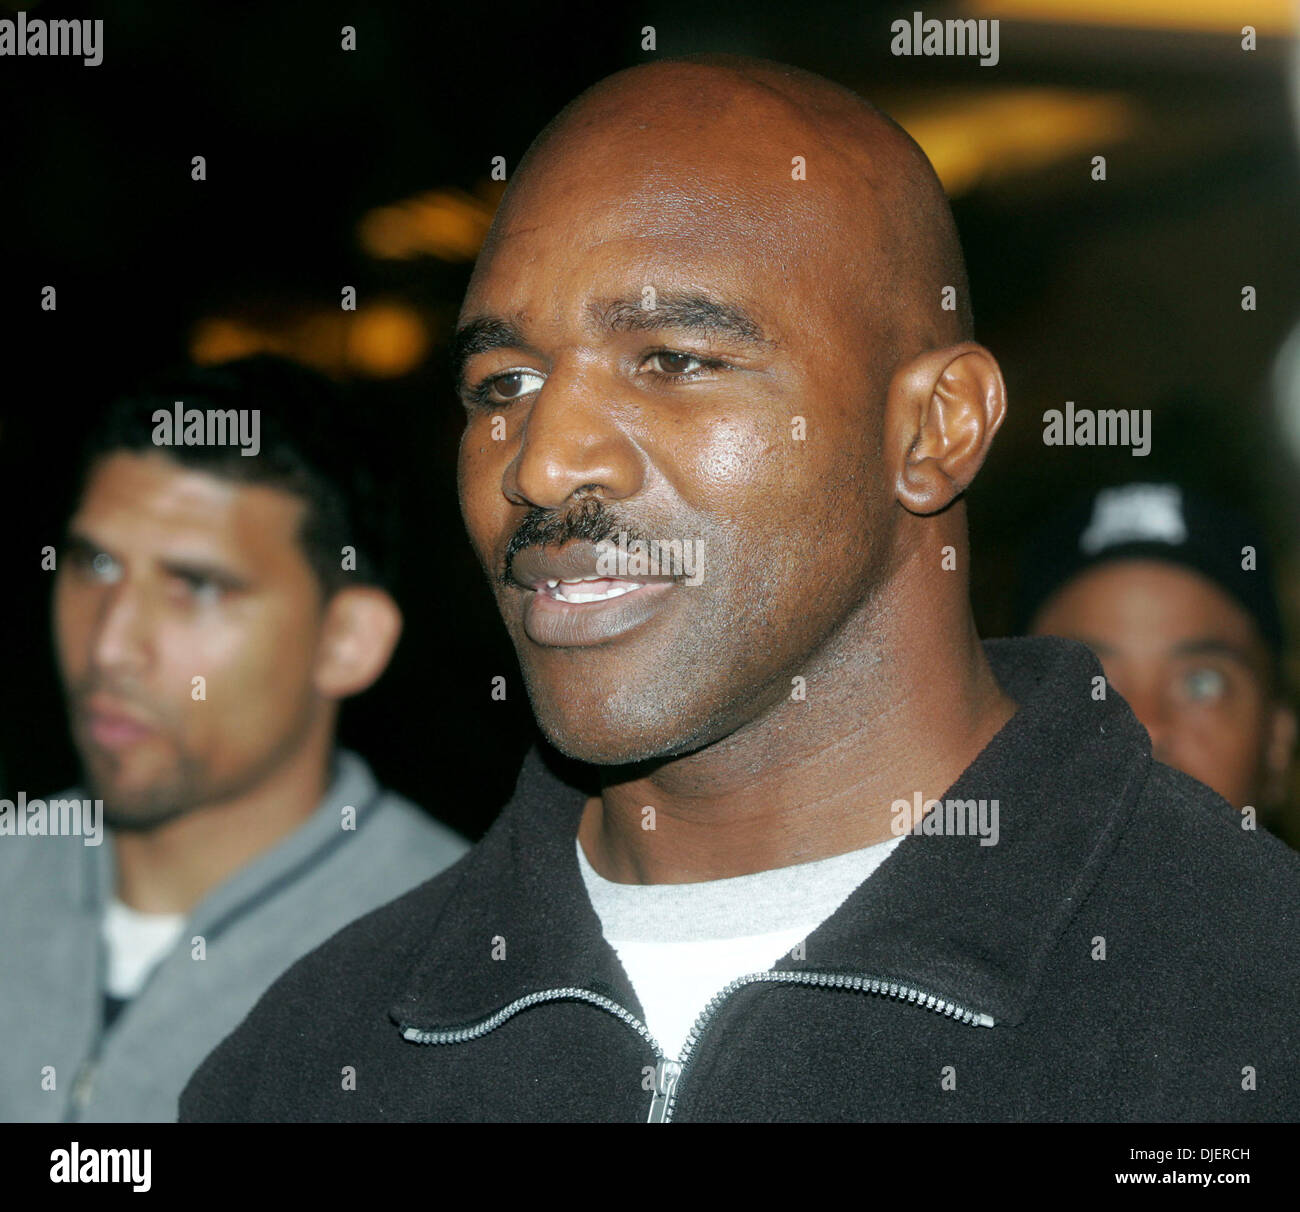 Oct 08, 2007 - Moscow, Russia - BOXING: EVANDER HOLYFIELD in between training in Moscow prior to his fight with Sultan Ibragimov on Oct. 13th in Moscow for the WBO World Heavyweight Championship. Holyfield's goal is to unify the heavyweight championship. (Credit Image: © Aleksander V.Chernykh/PhotoXpress/ZUMA Press) RESTRICTIONS: North and South America RIGHTS ONLY! Stock Photo